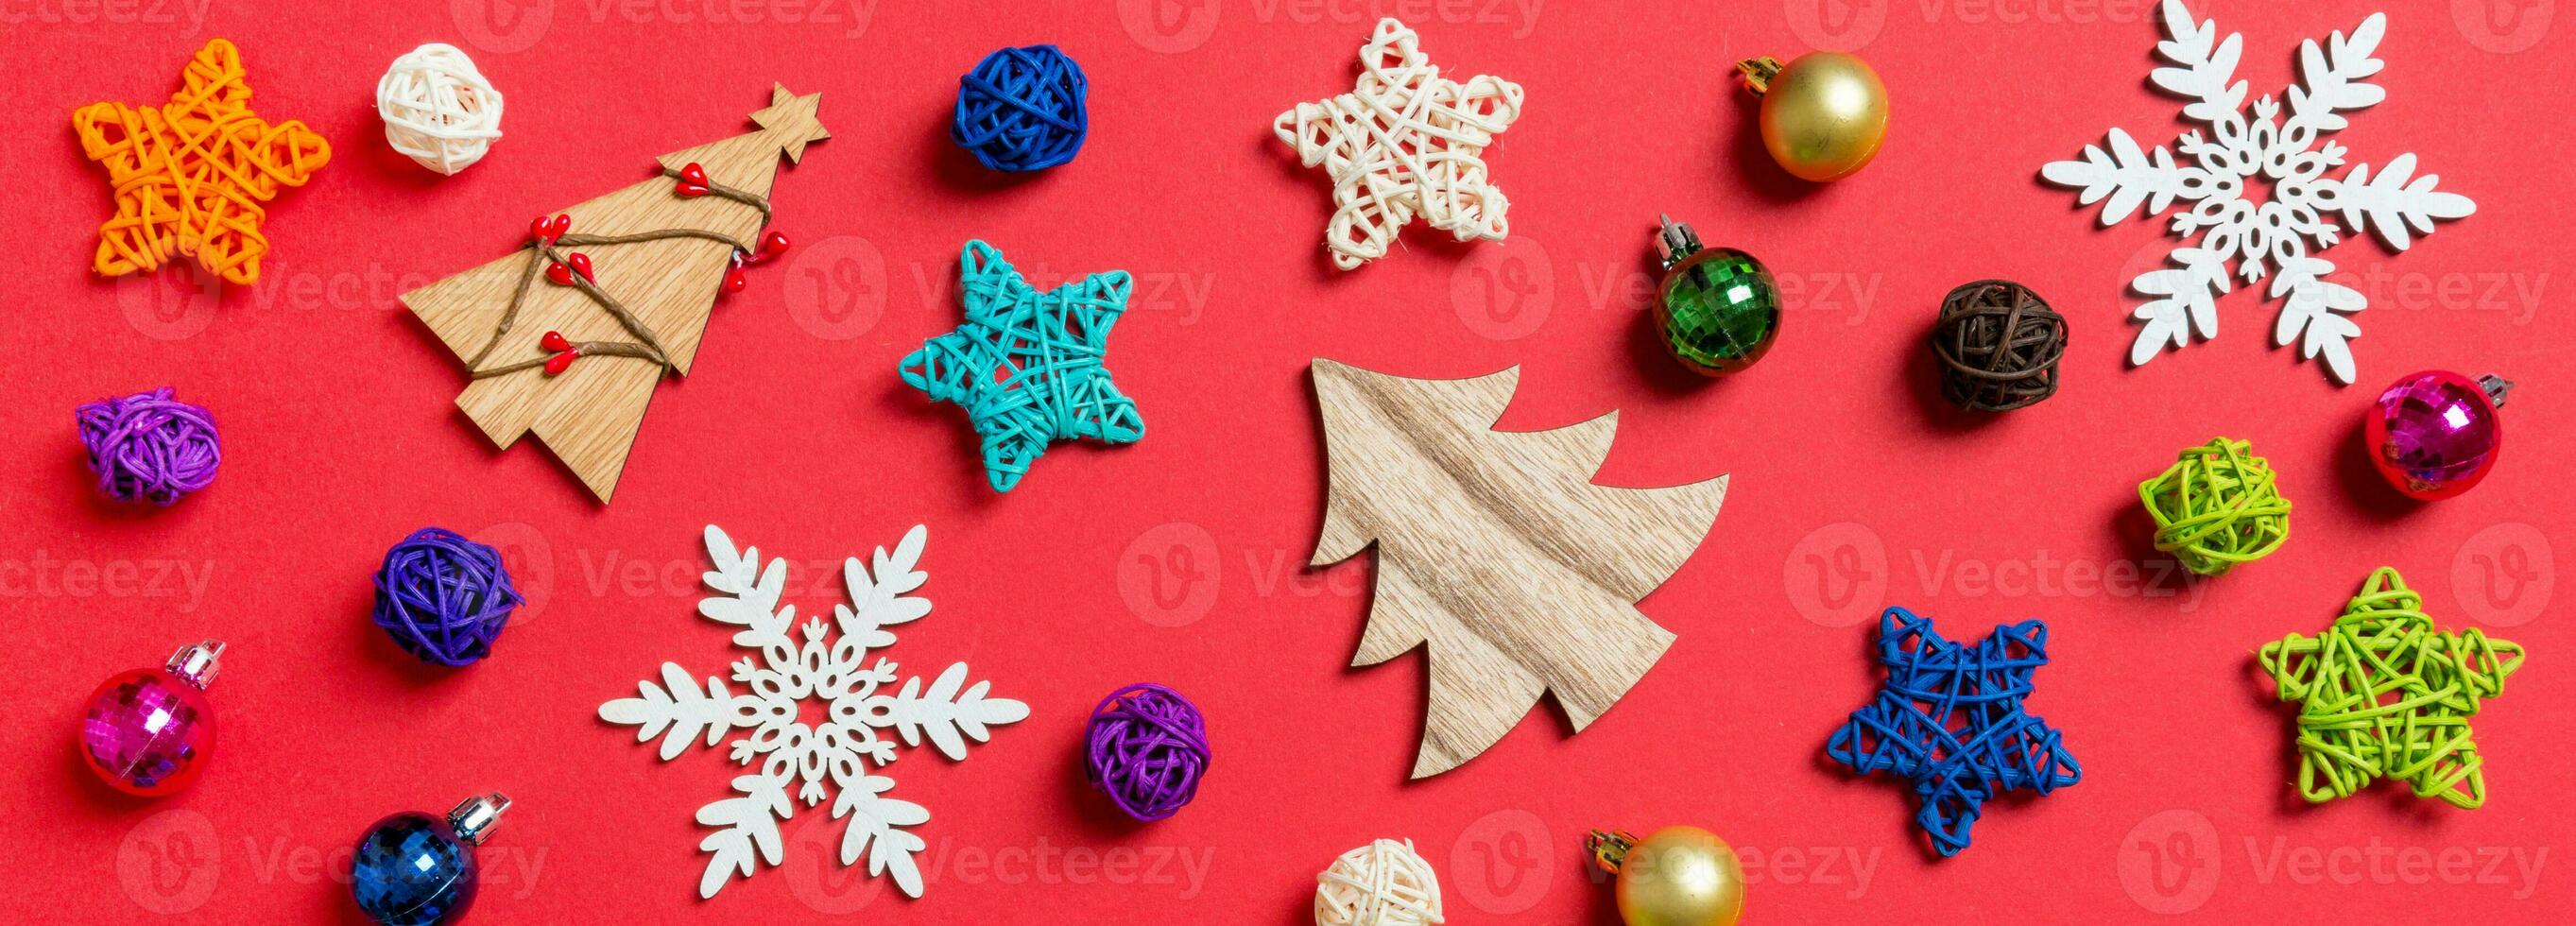 Top view Banner of holiday decorations and toys on red background. Christmas ornament concept photo